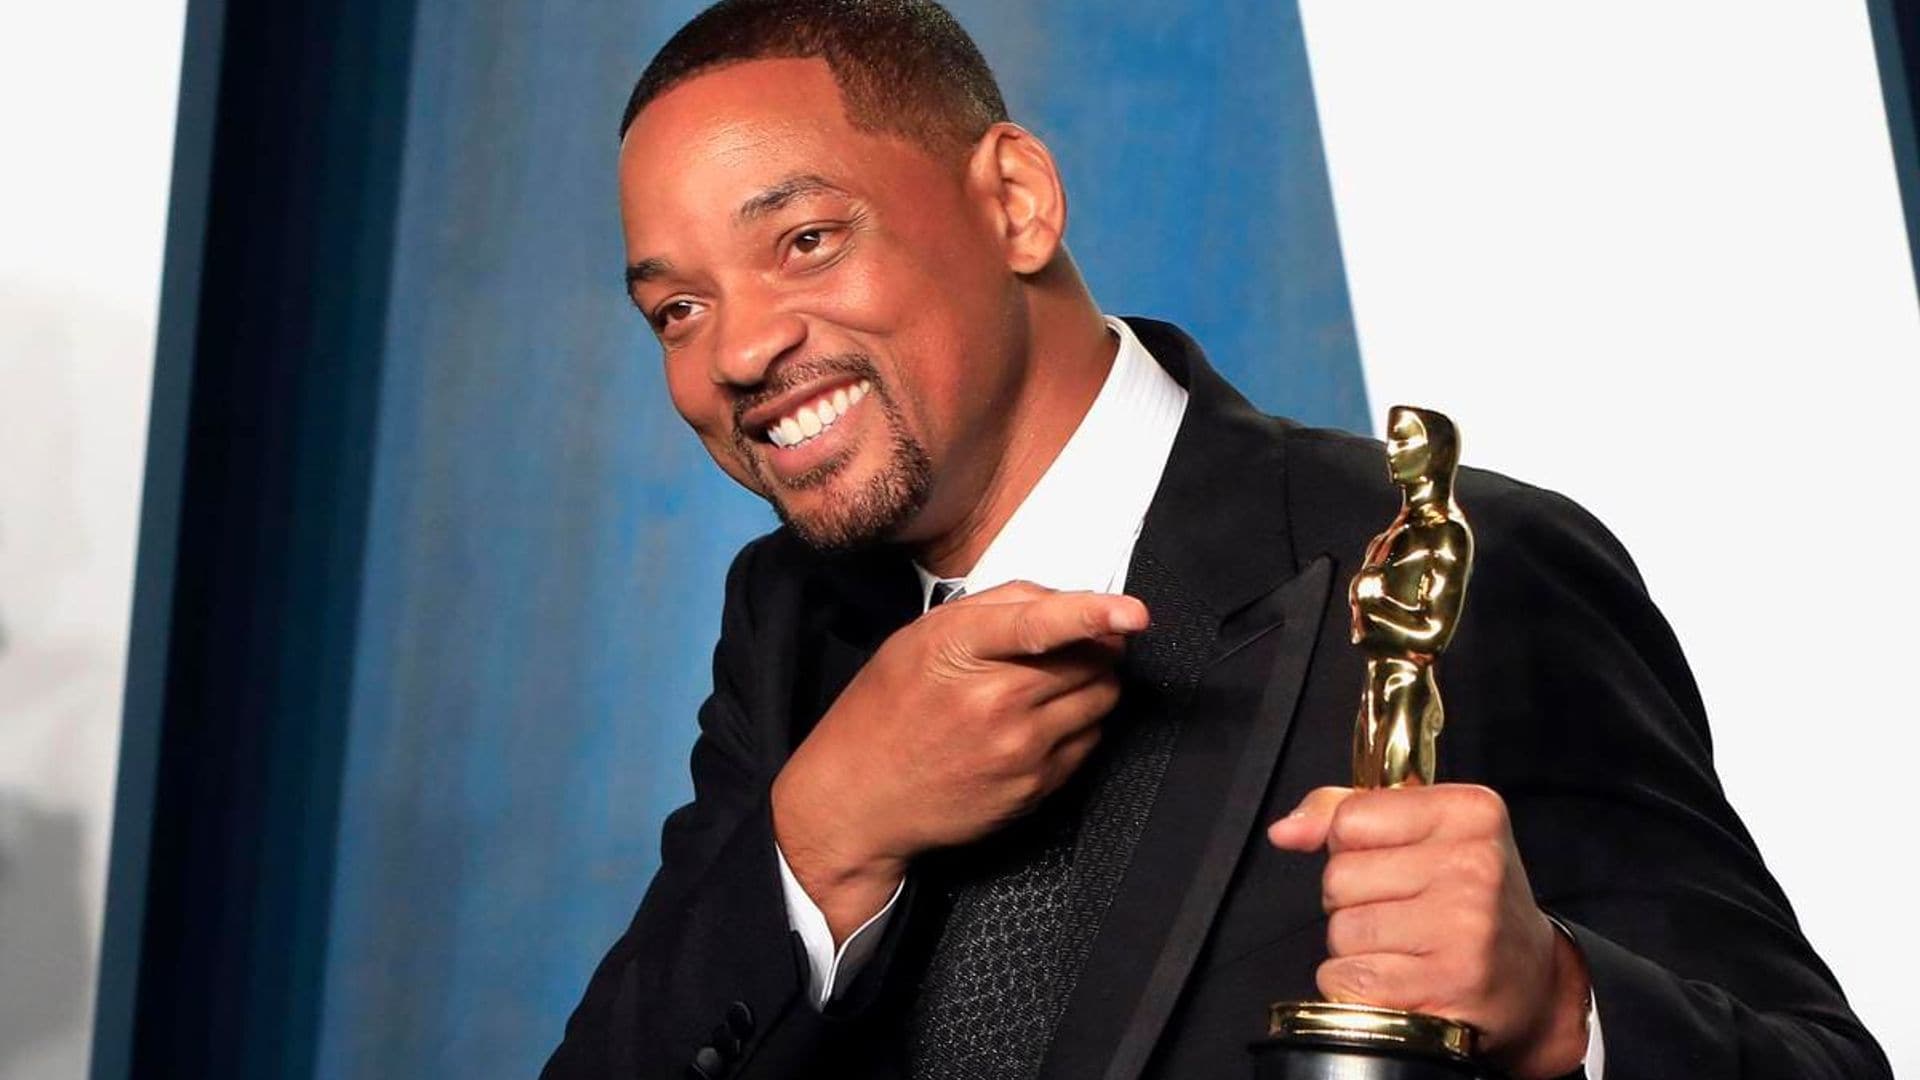 Will Smith’s upcoming projects paused after Oscars incident